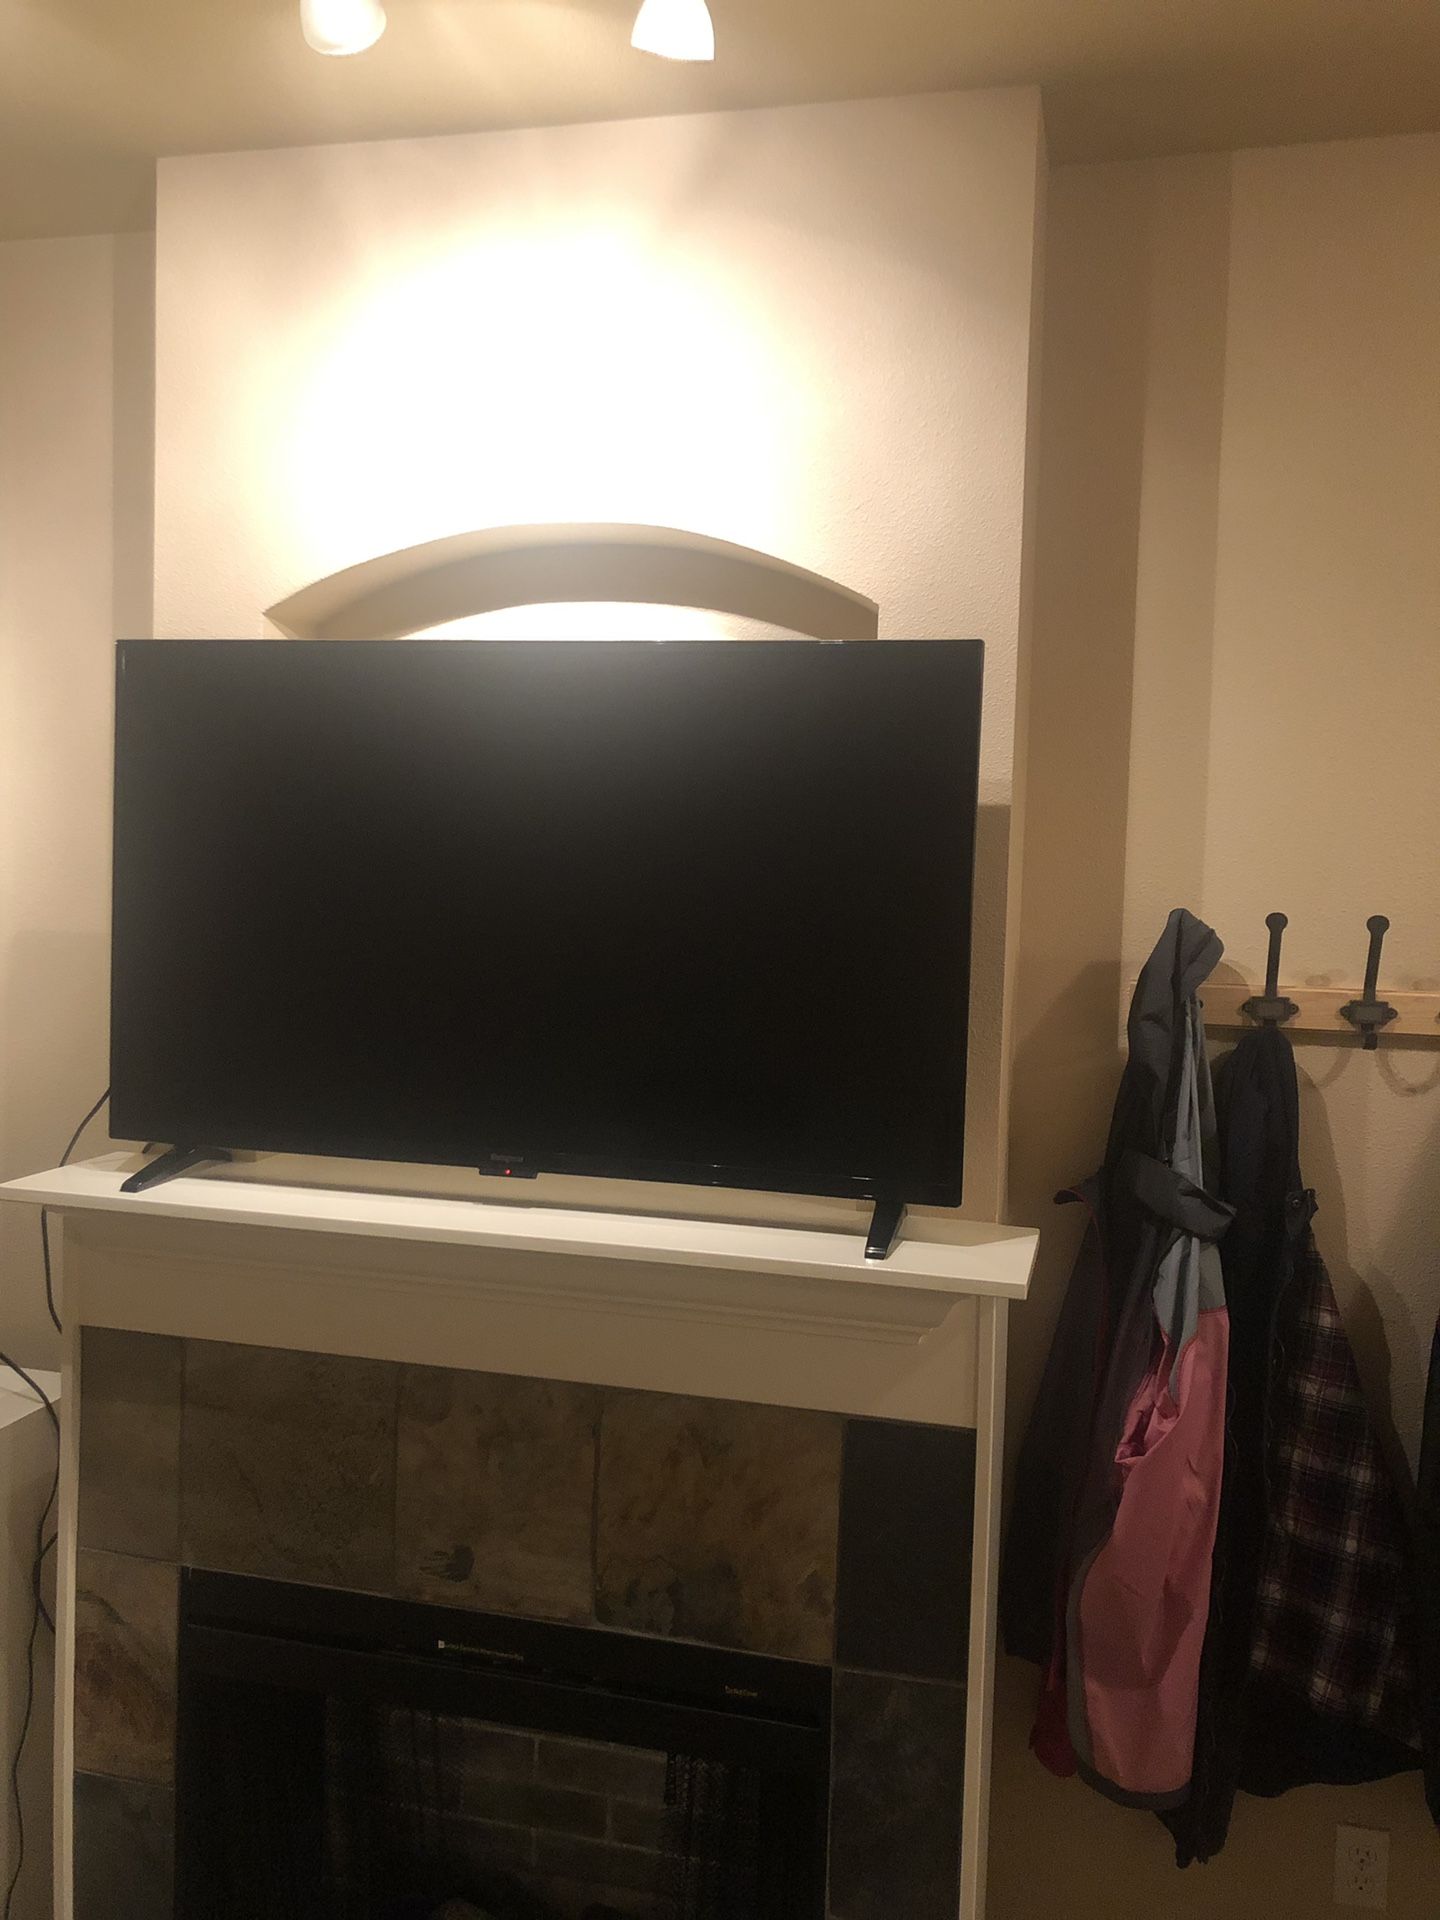 50 inch Westinghouse TV